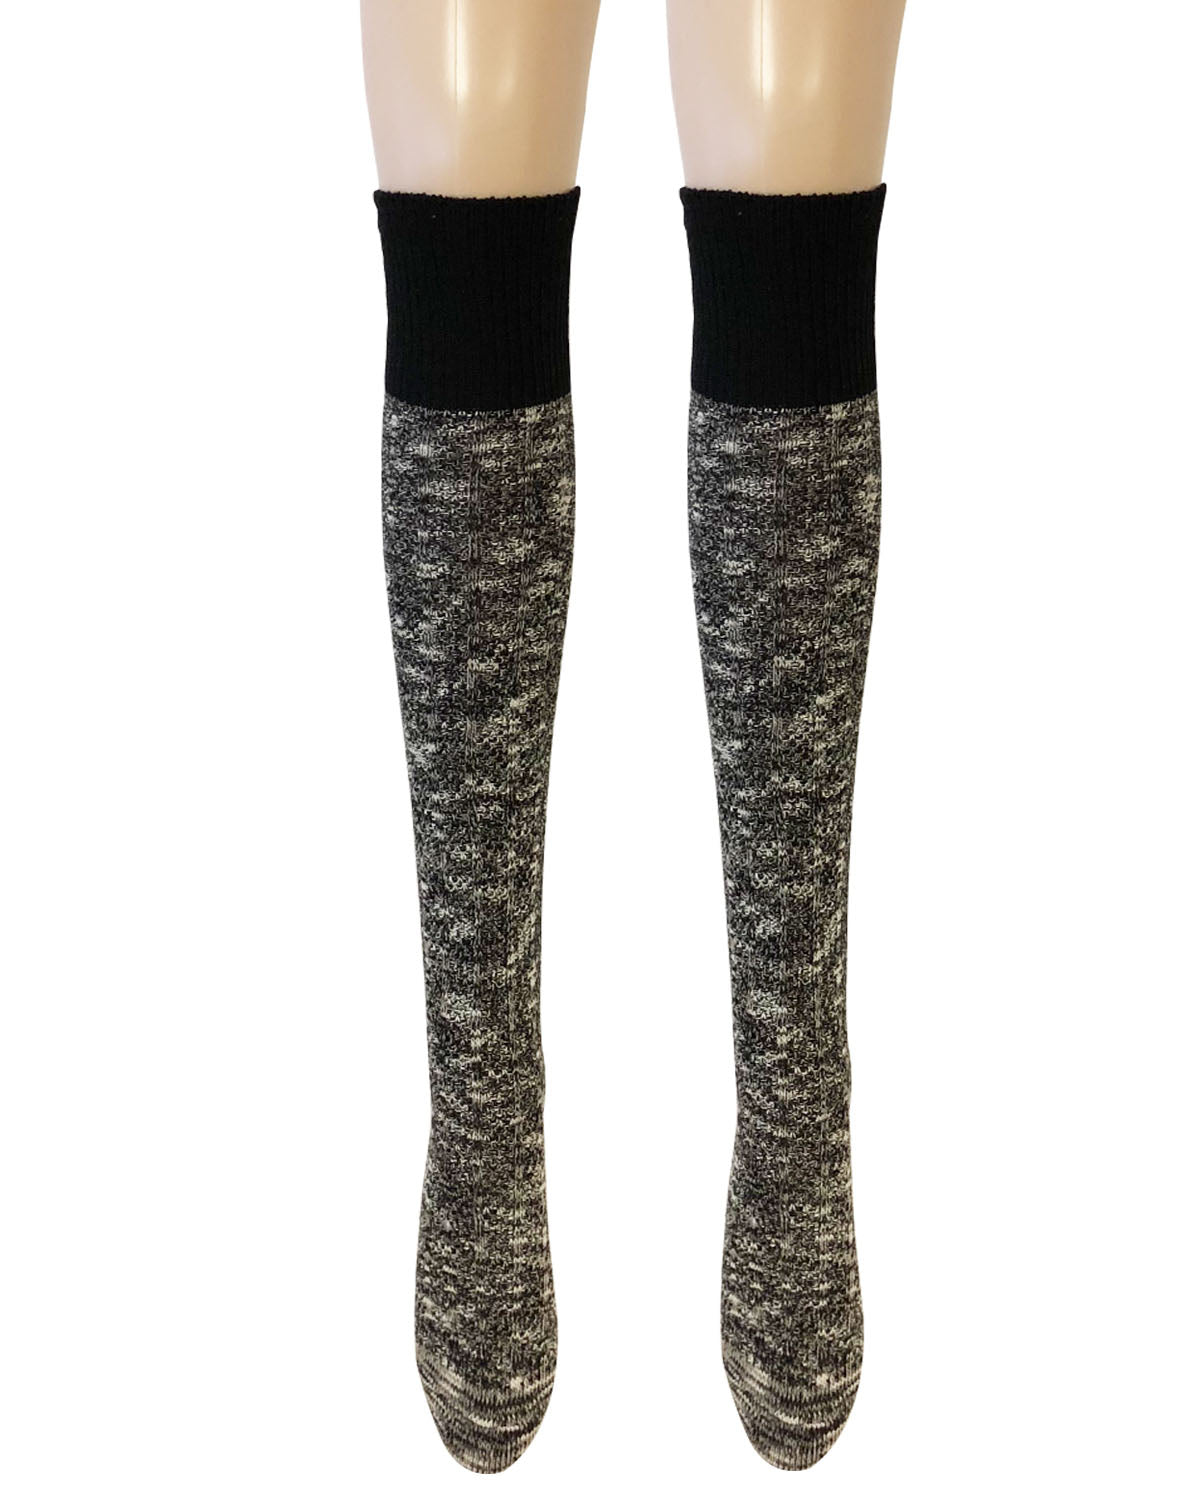 WrapablesÂ® Women's Warm Knitted Vintage Knee High Boot Socks